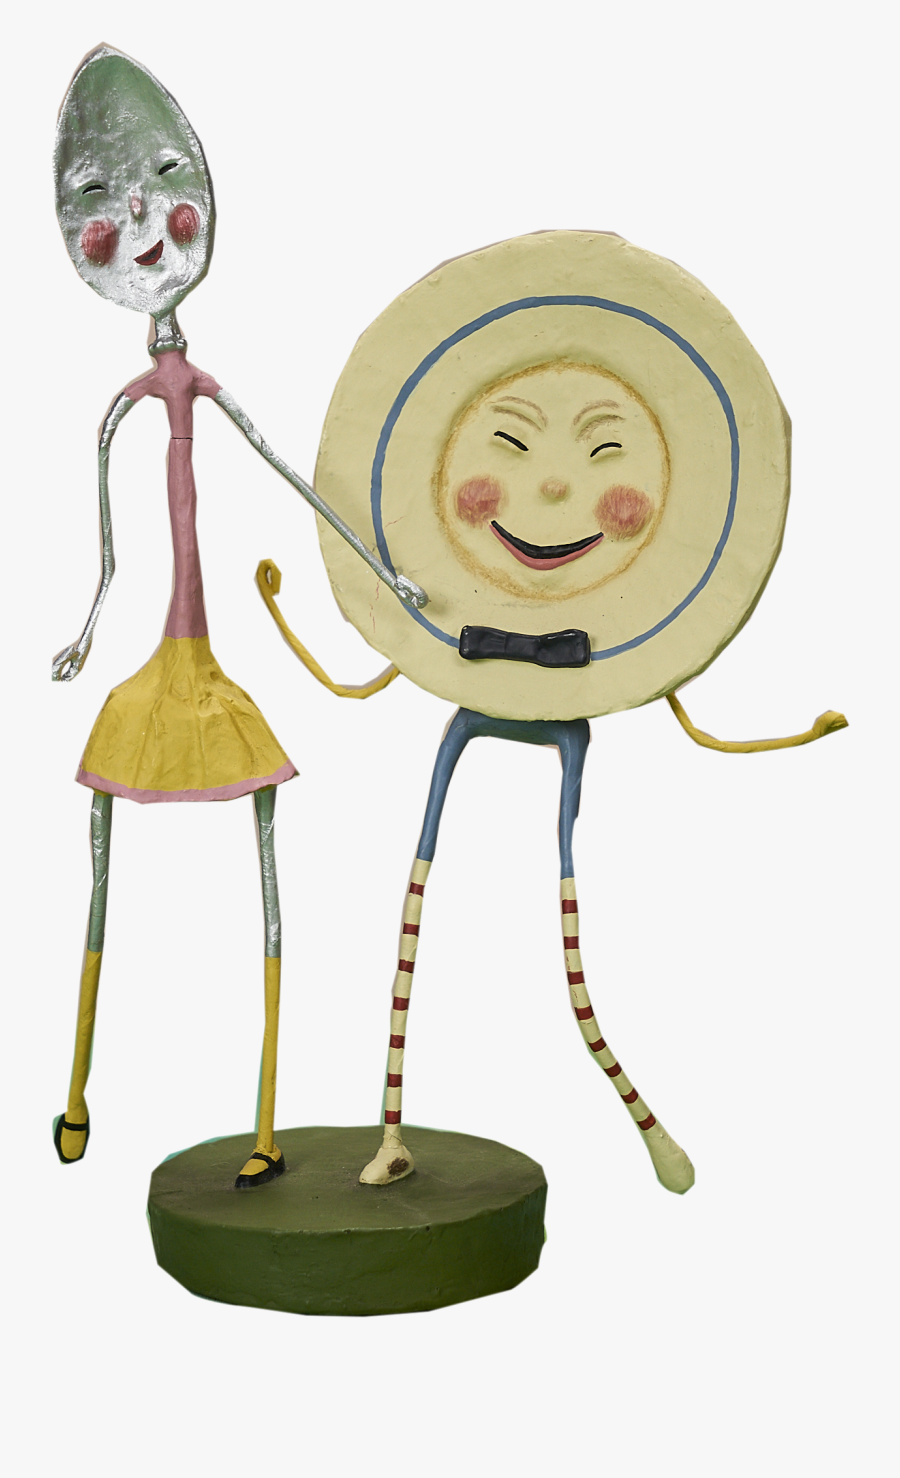 The Dish And Spoon Figurine - Cartoon, Transparent Clipart